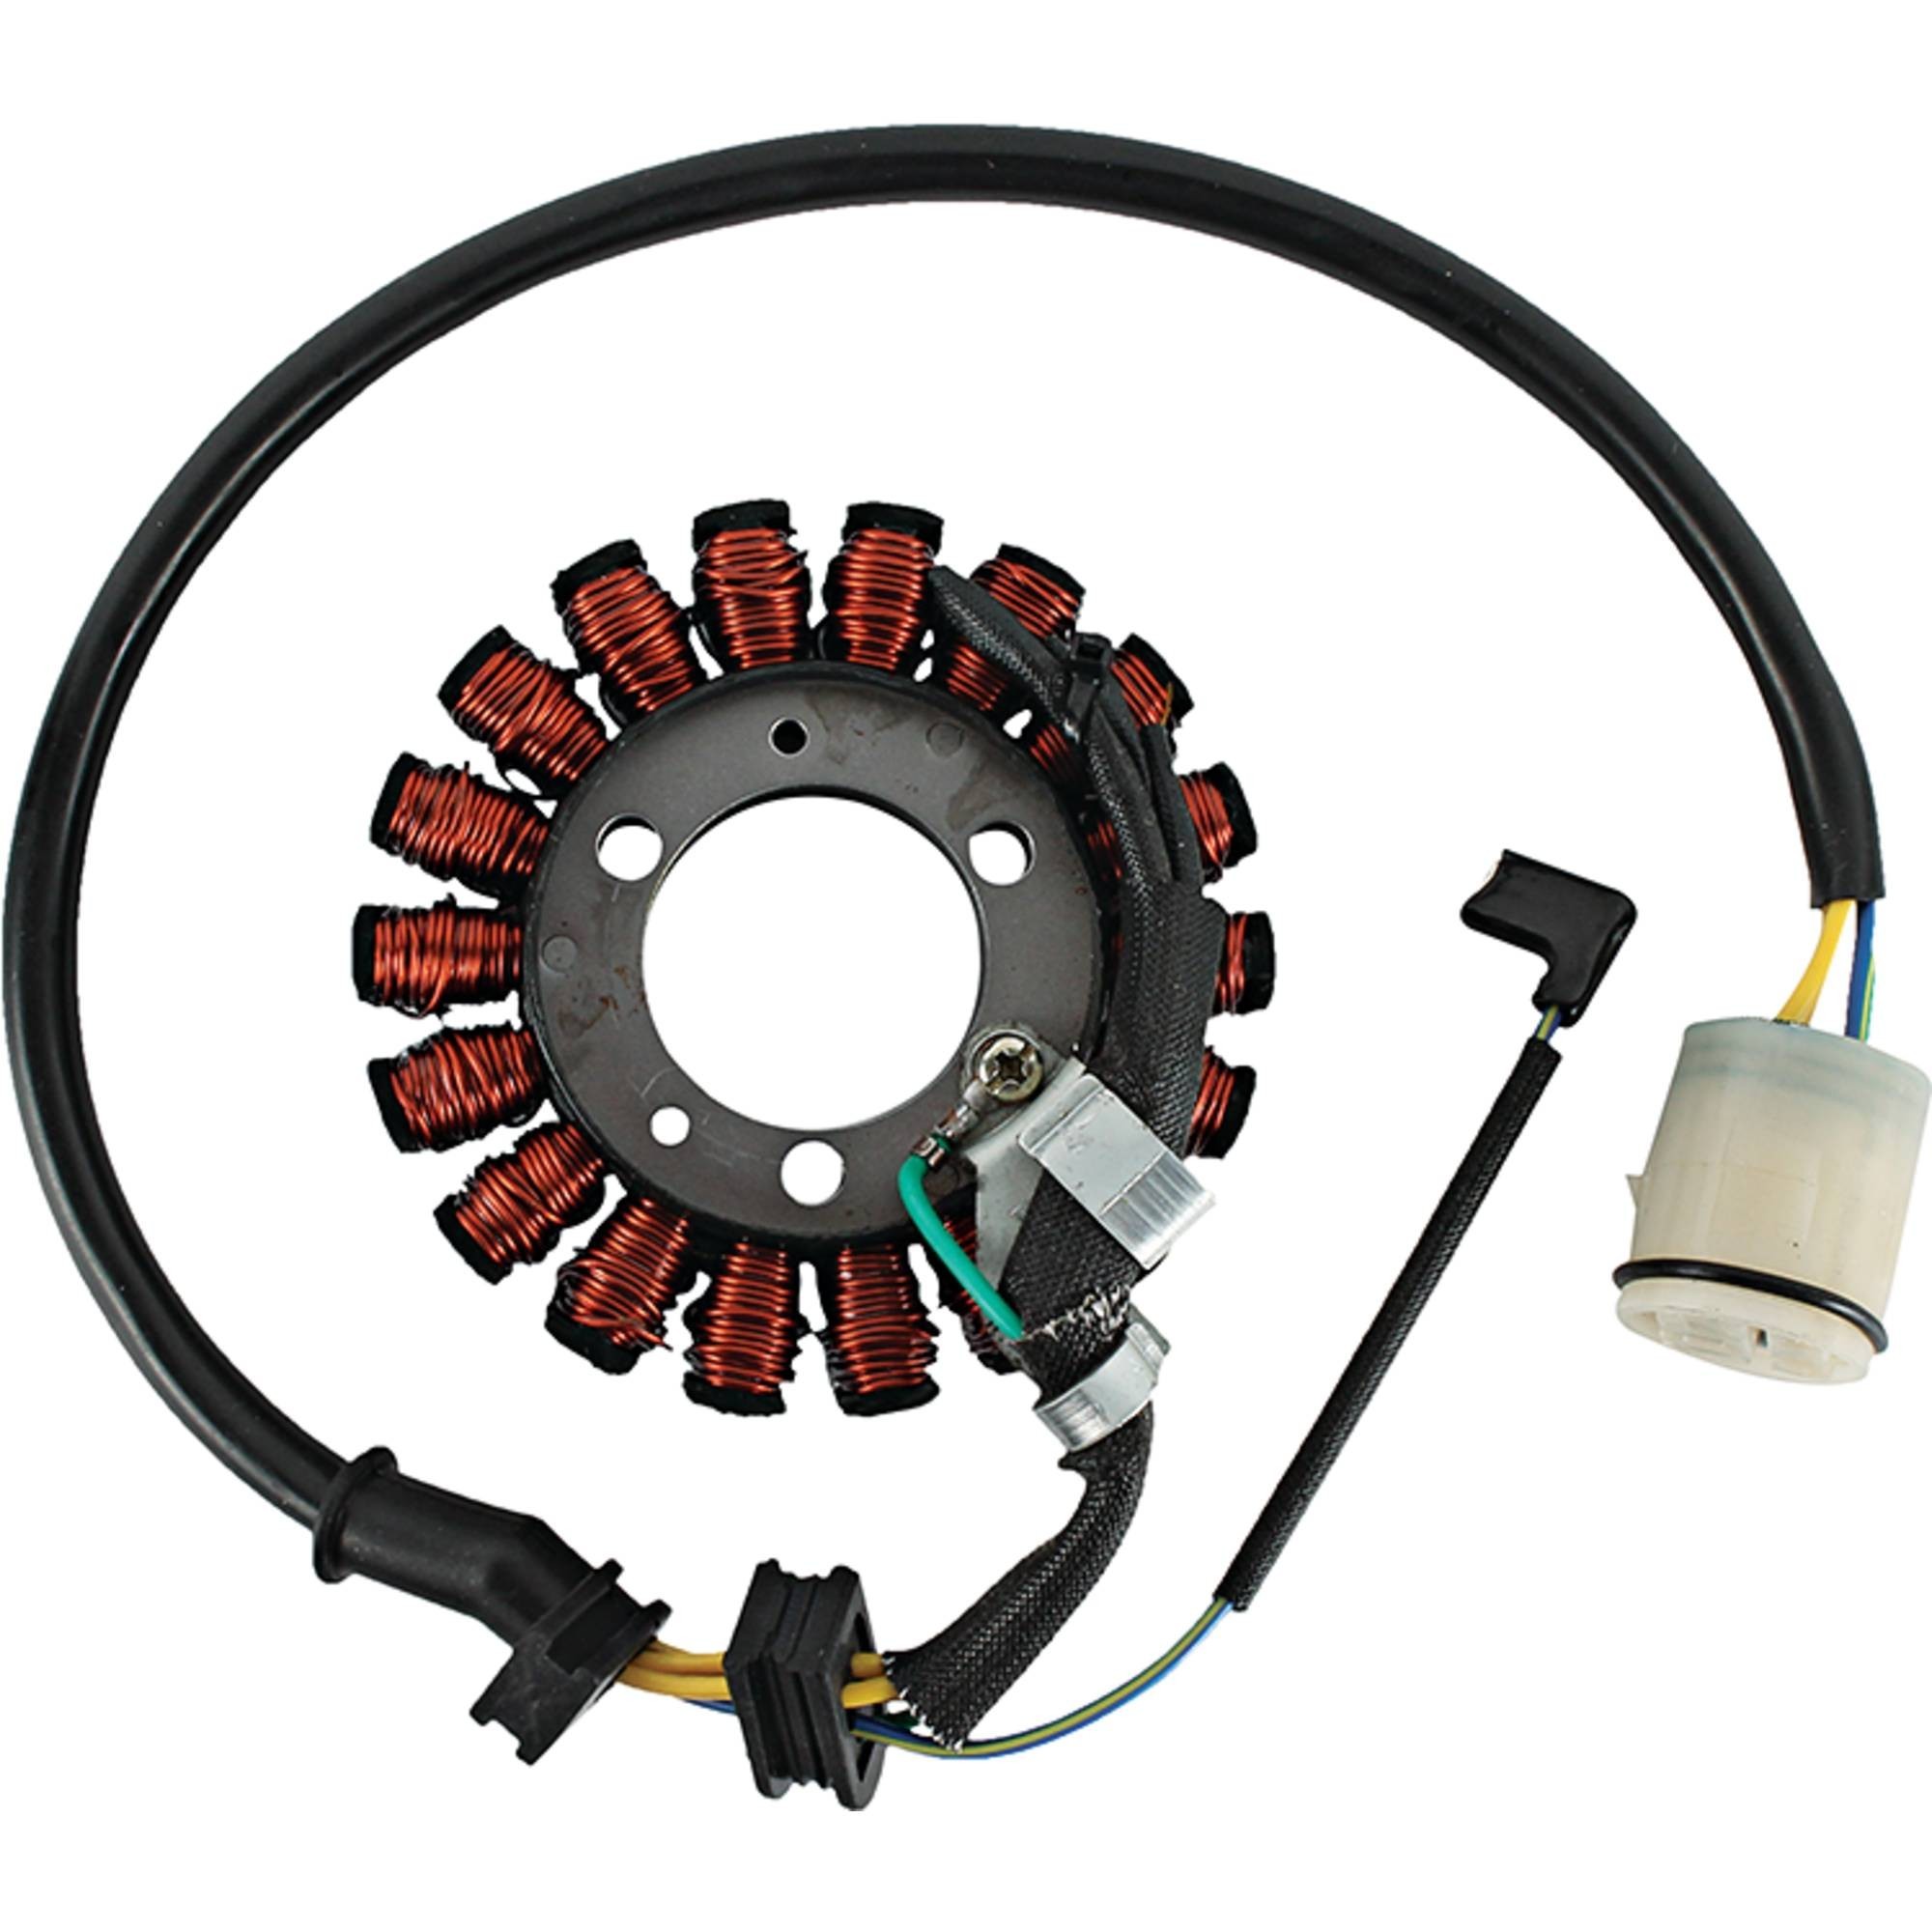 DB Electrical New Honda ATV Stator Coil Denso Version, Not Sealed in Epoxy for RX350FE Rancher